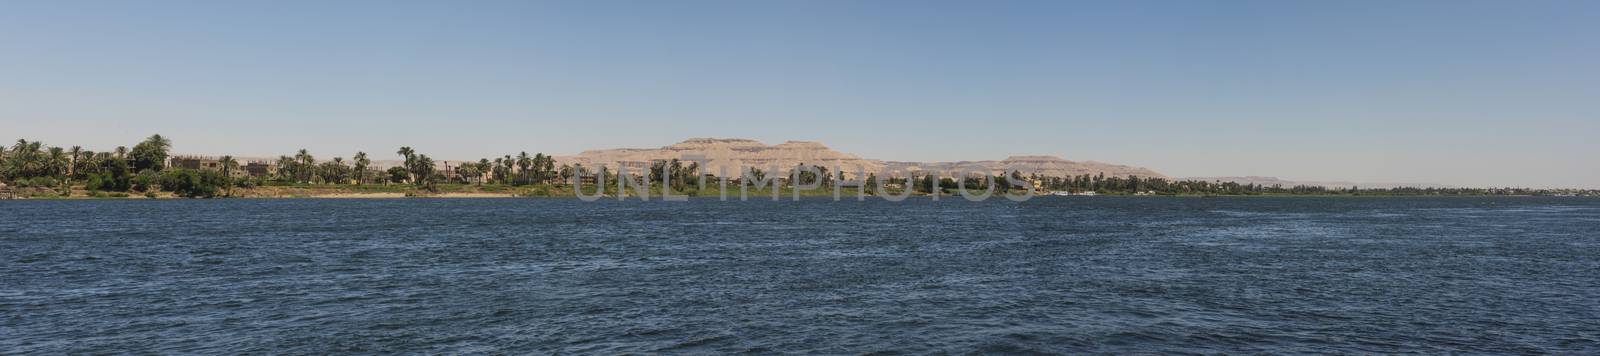 View of river nile in Egypt showing Luxor west bank by paulvinten